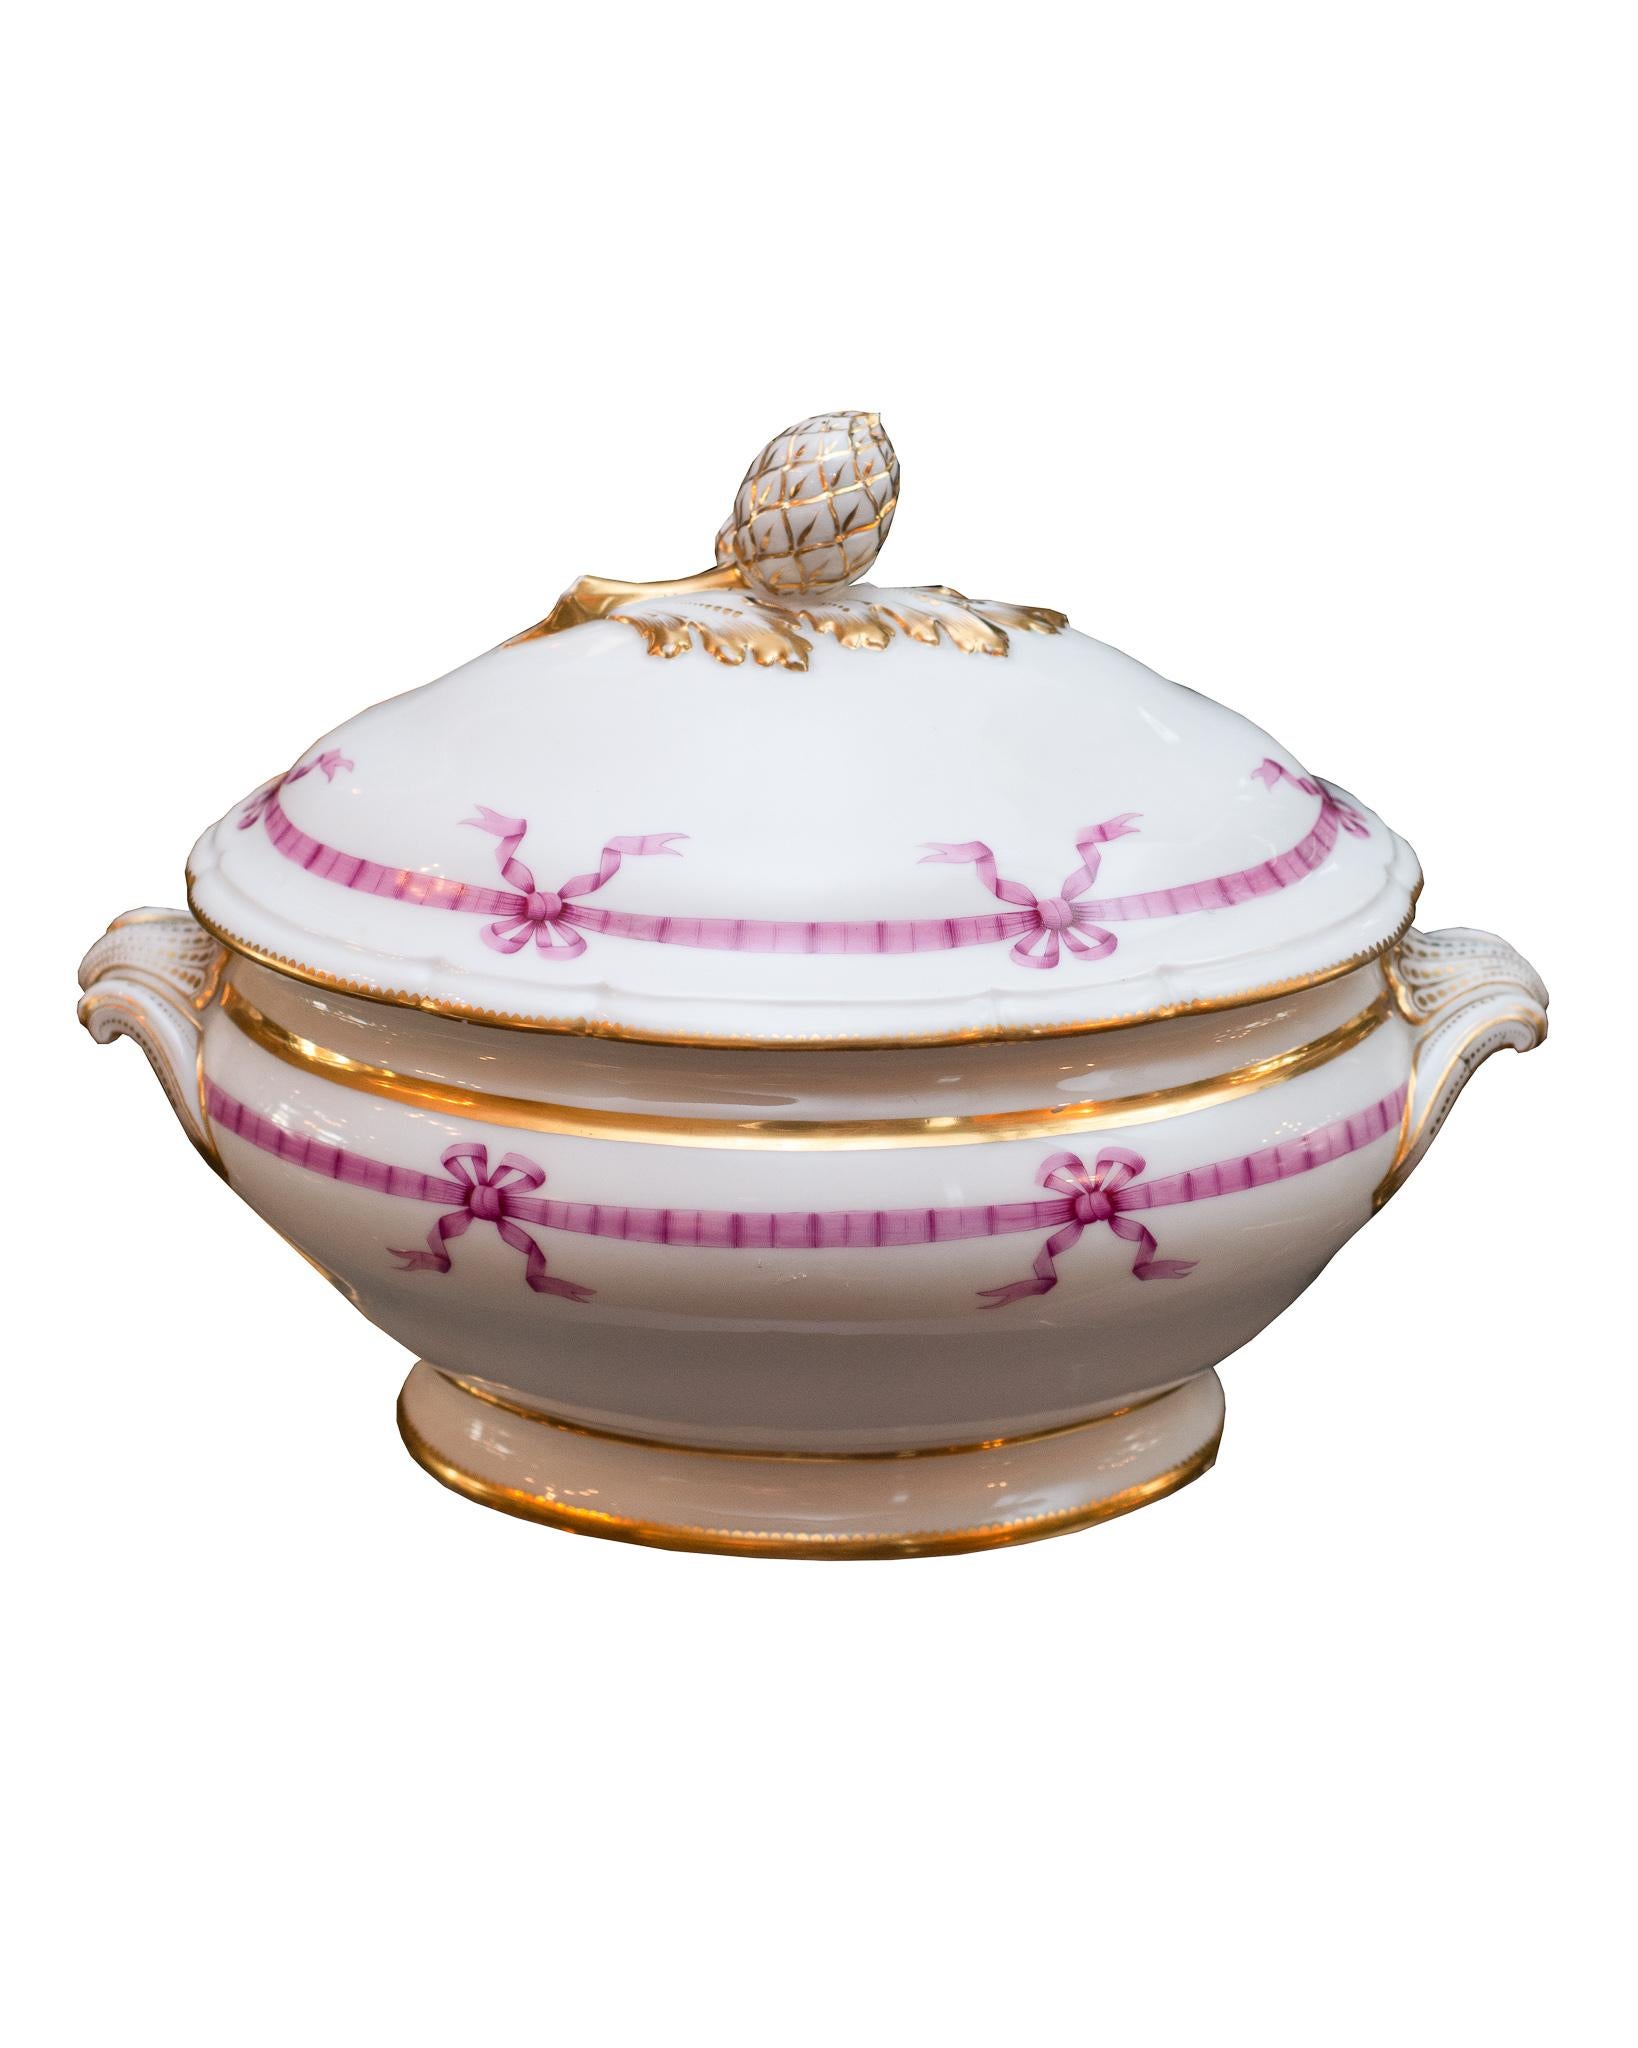 A magnificent French antique 22-piece dinner set circa 1850 with pink ribbon design. Set includes: 12 dinner plates- 9.5